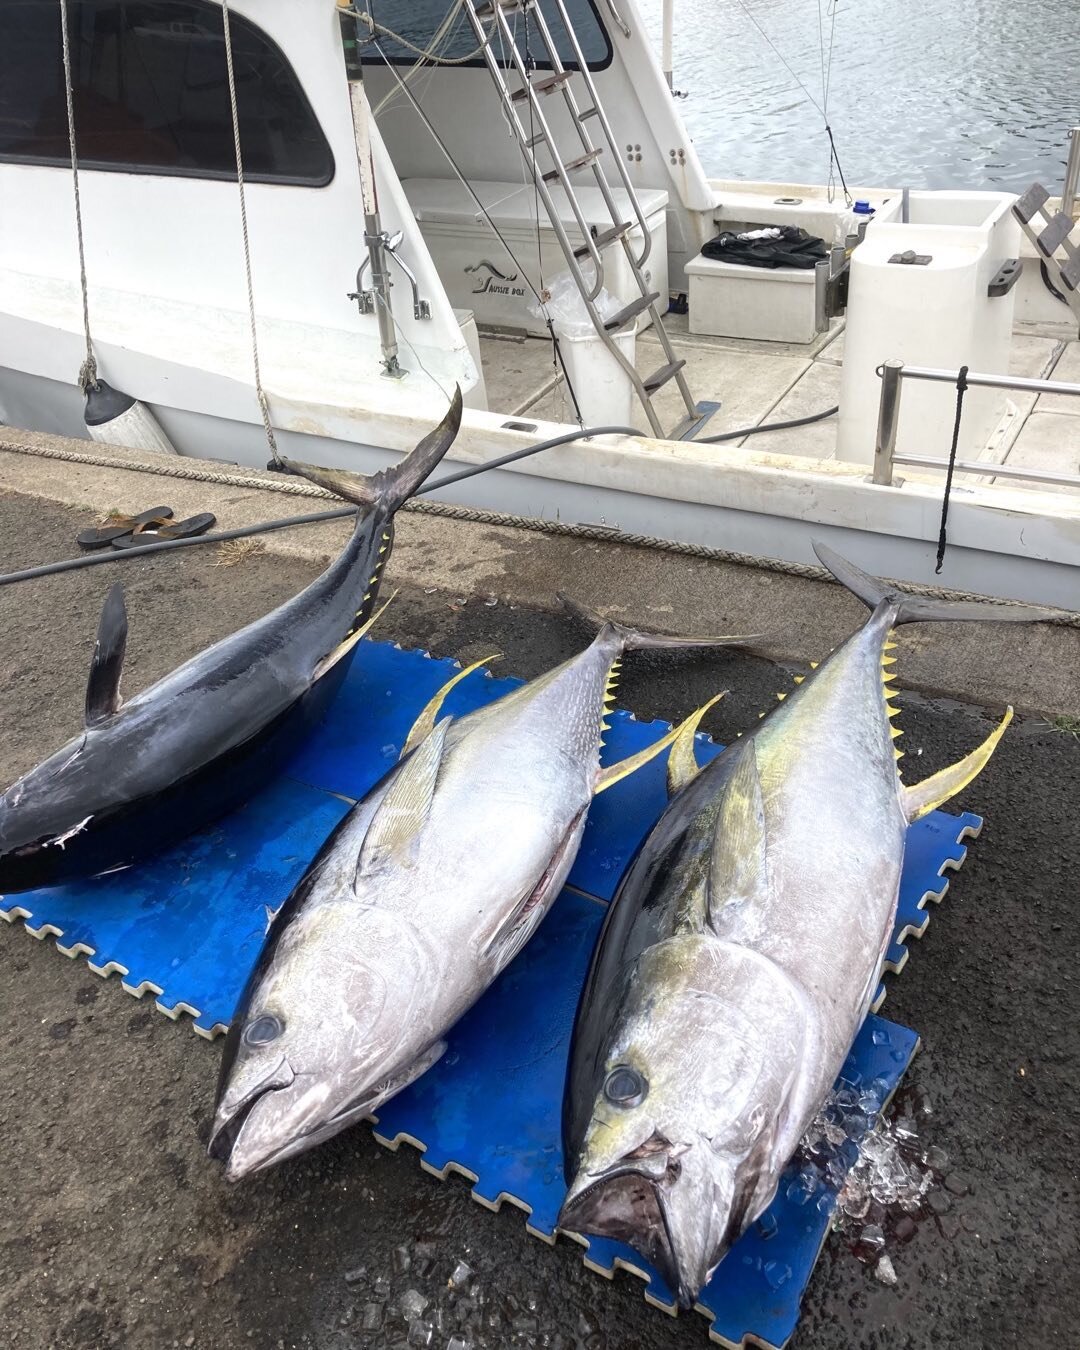 Had fun yesterday. No charter during Ahi season...no problem. We go do our thing anyway. Been bad about answering the phone this week. I know I missed out on some 1/2 day charters and I am cool with that. If you want to chase ahis book a full day thr